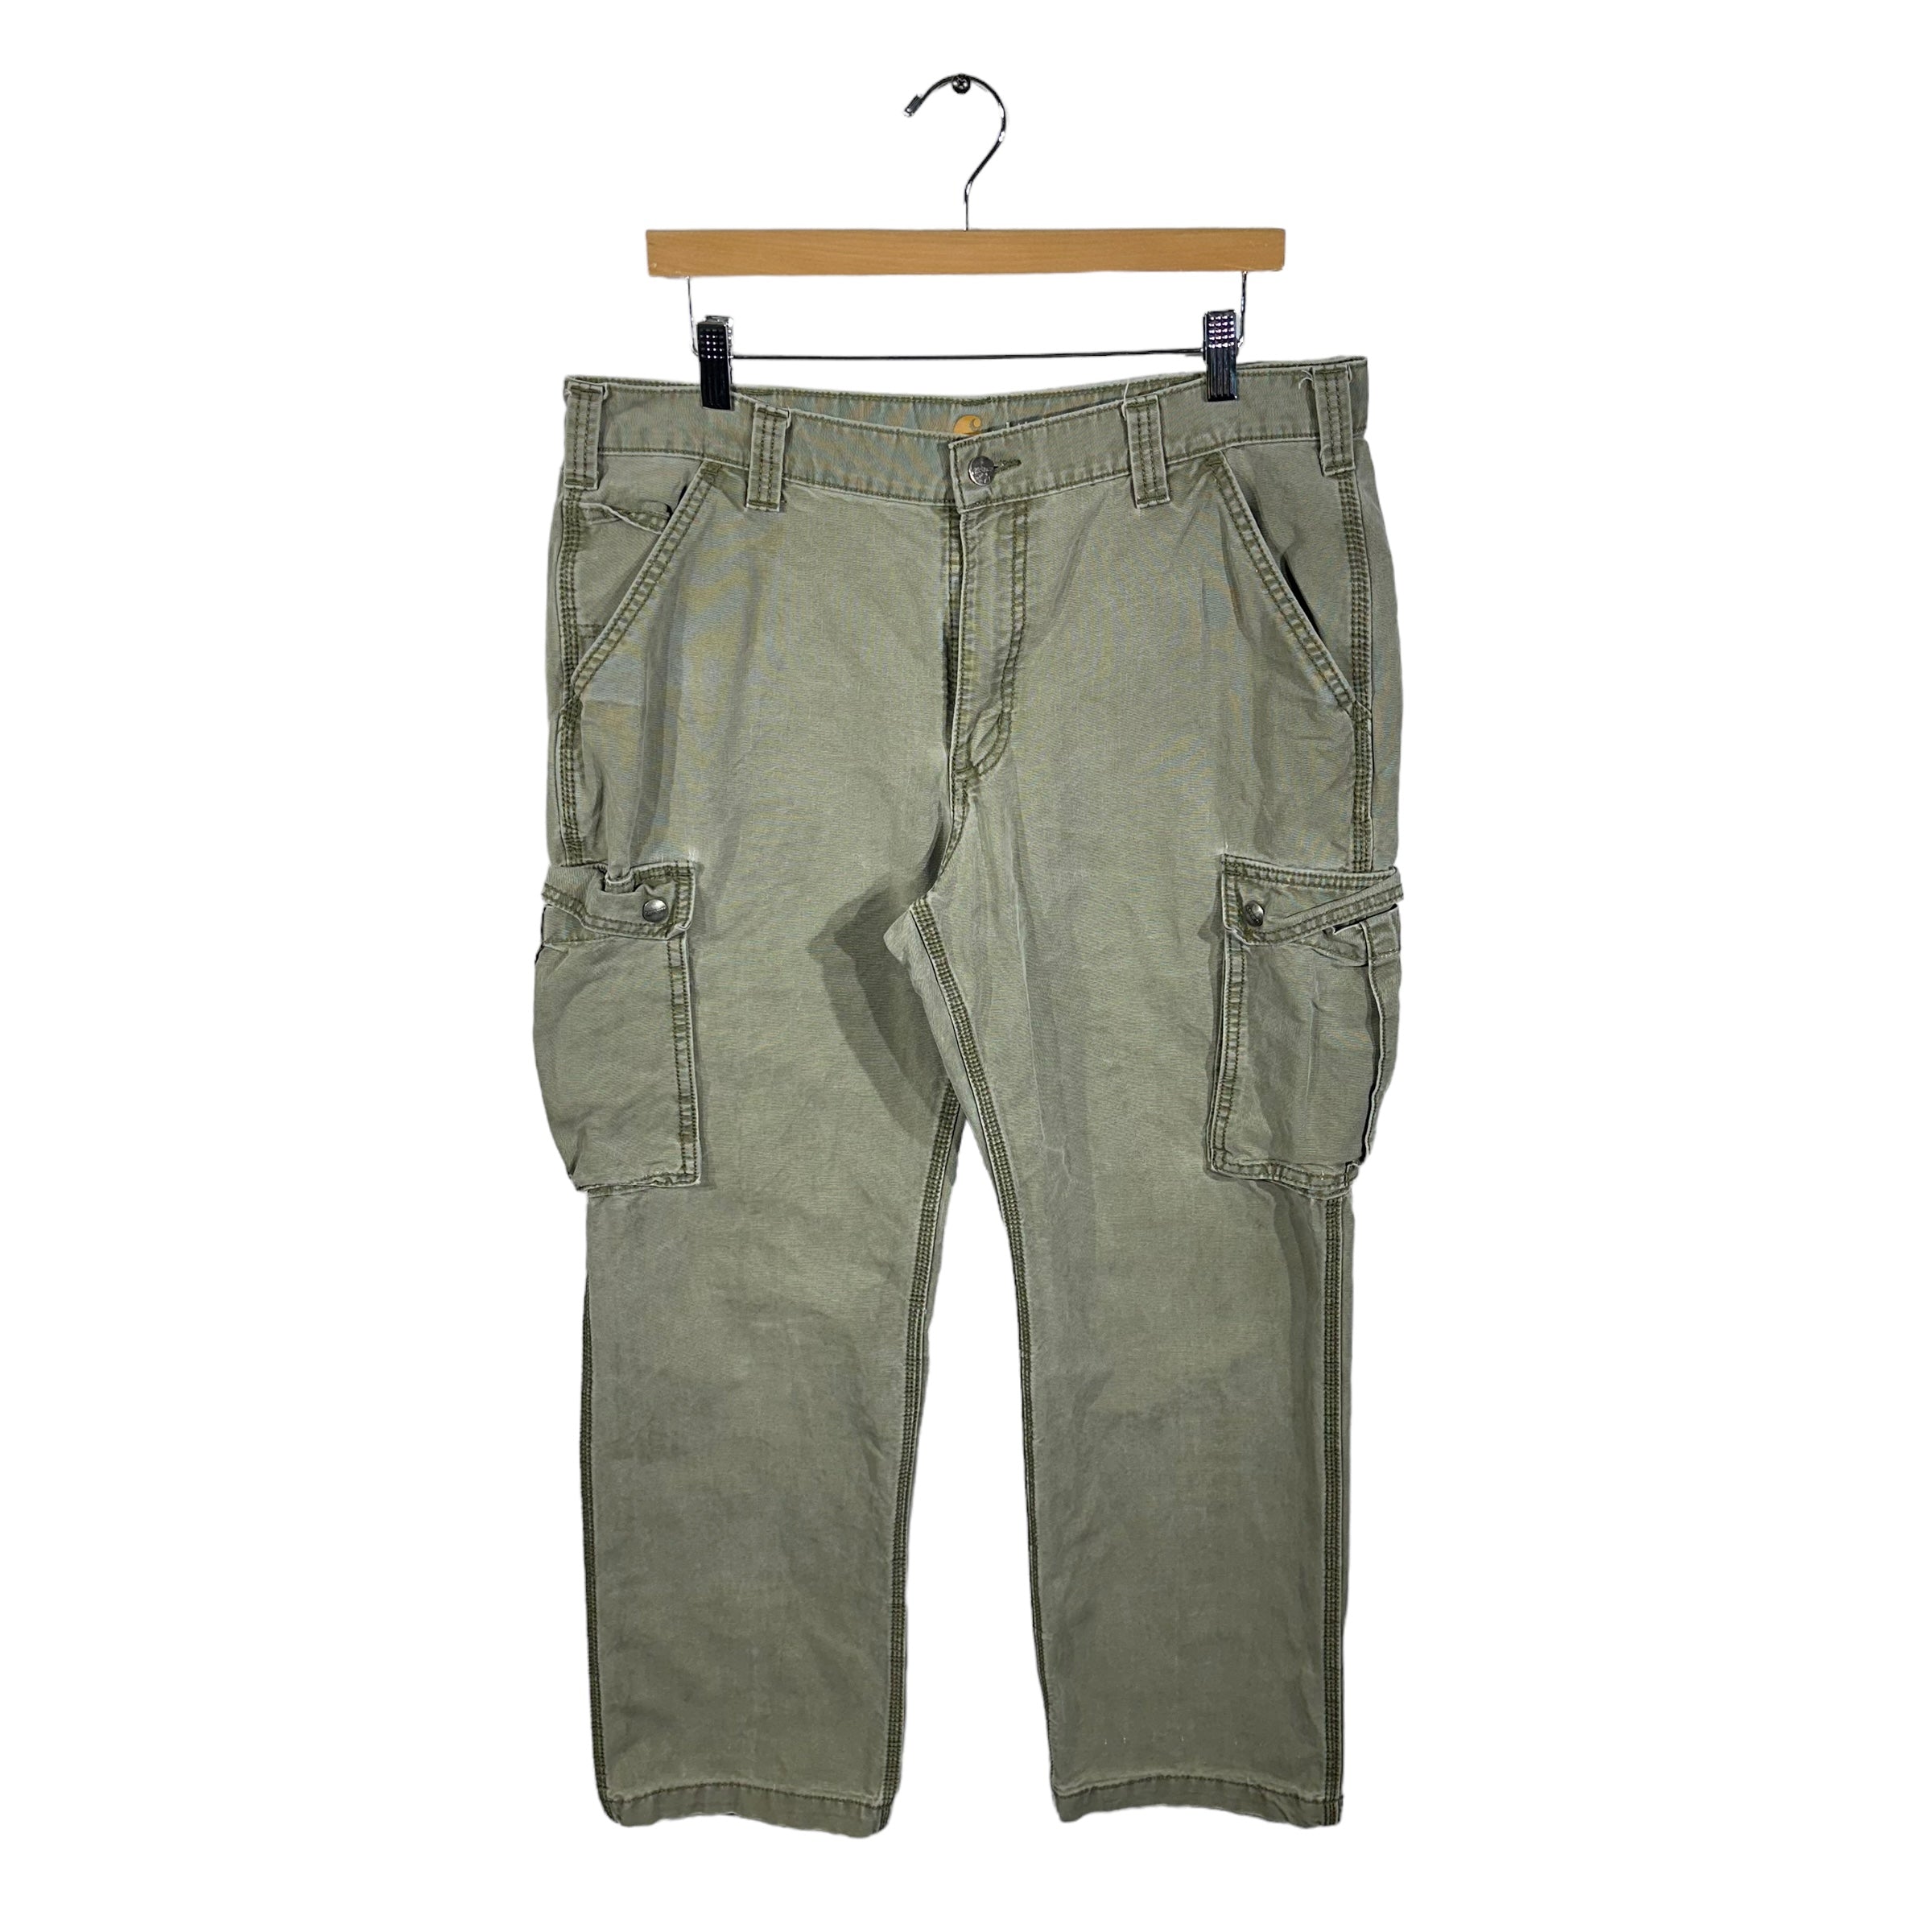 Vintage Carhartt Relaxed Fit Cargo Pants